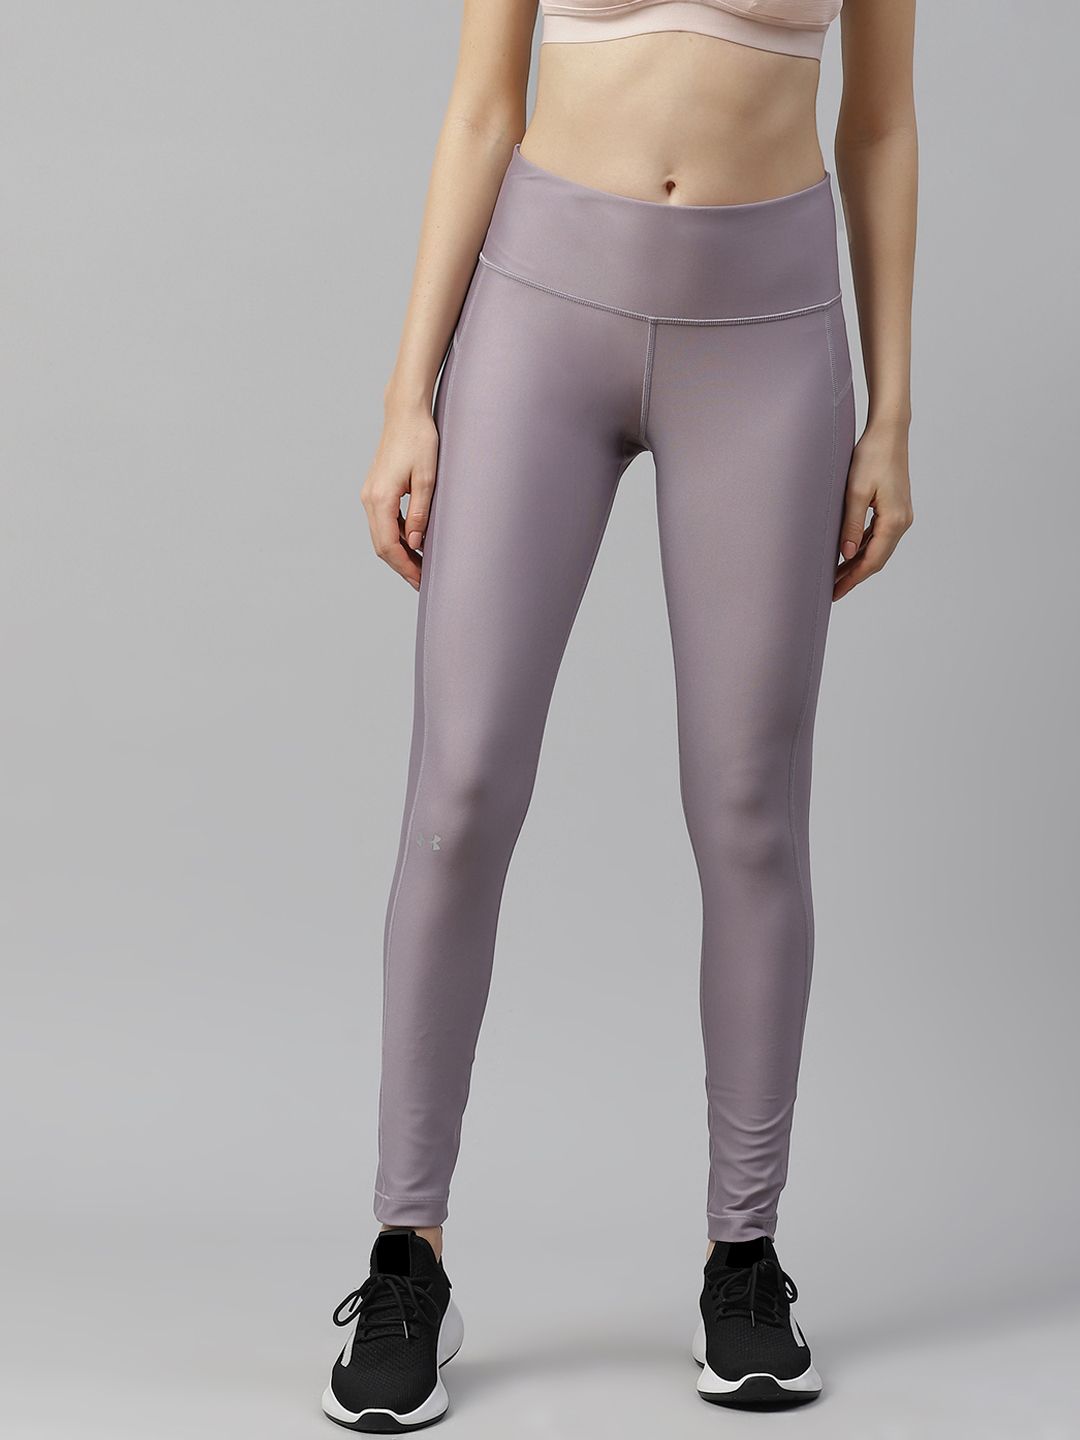 UNDER ARMOUR Women Lavender Heat Gear Armour Hi-Rise Solid Tights Price in India